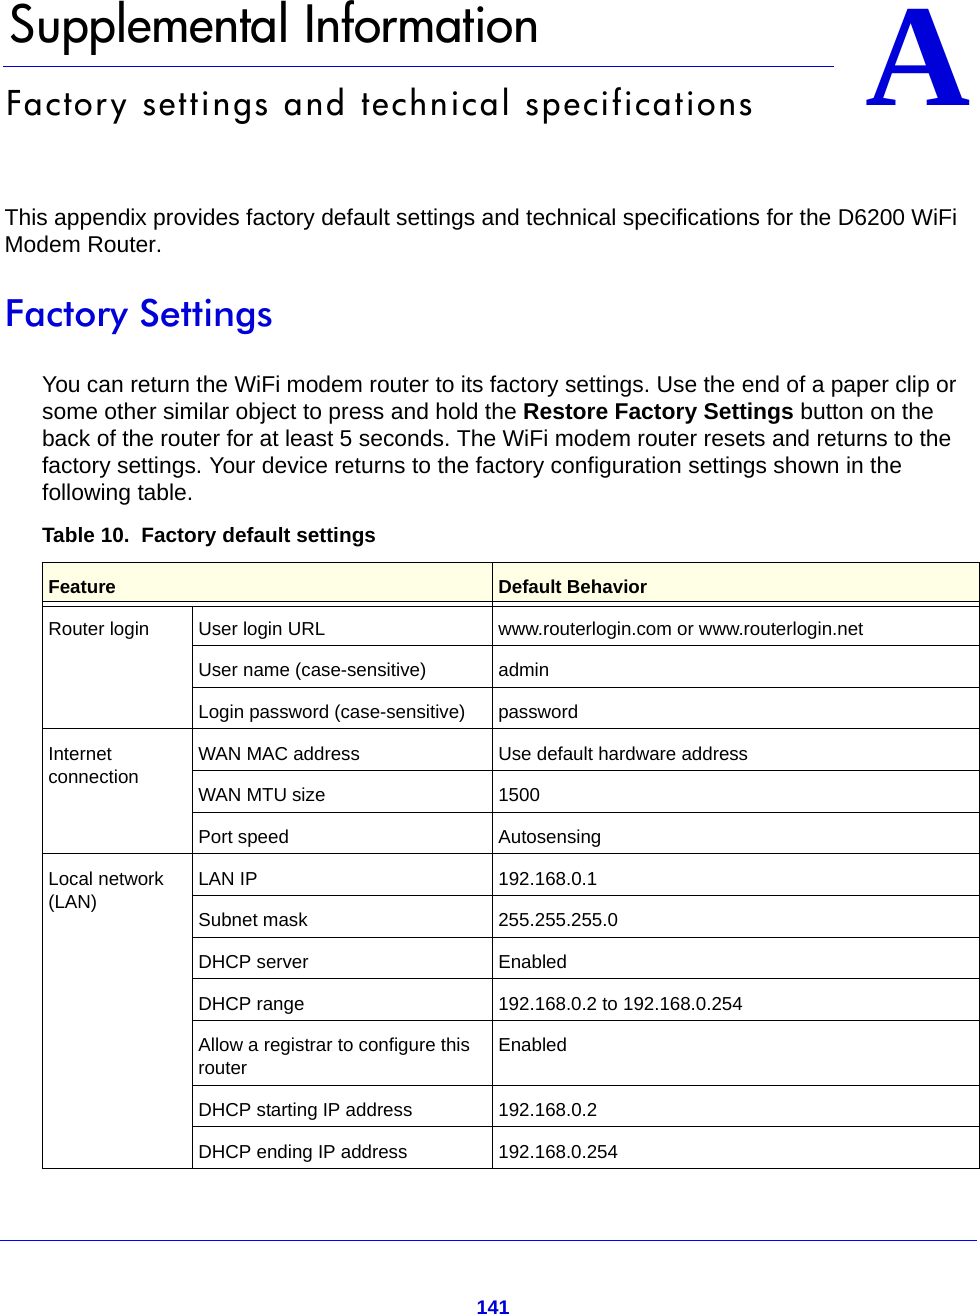 141AA.   Supplemental InformationFactory settings and technical specificationsThis appendix provides factory default settings and technical specifications for the D6200 WiFi Modem Router.Factory SettingsYou can return the WiFi modem router to its factory settings. Use the end of a paper clip or some other similar object to press and hold the Restore Factory Settings button on the back of the router for at least 5 seconds. The WiFi modem router resets and returns to the factory settings. Your device returns to the factory configuration settings shown in the following table.Table 10.  Factory default settings  Feature Default BehaviorRouter login User login URL www.routerlogin.com or www.routerlogin.netUser name (case-sensitive) admin Login password (case-sensitive) passwordInternet connectionWAN MAC address Use default hardware addressWAN MTU size 1500Port speed AutosensingLocal network (LAN)LAN IP 192.168.0.1Subnet mask 255.255.255.0DHCP server EnabledDHCP range 192.168.0.2 to 192.168.0.254Allow a registrar to configure this routerEnabledDHCP starting IP address 192.168.0.2DHCP ending IP address 192.168.0.254